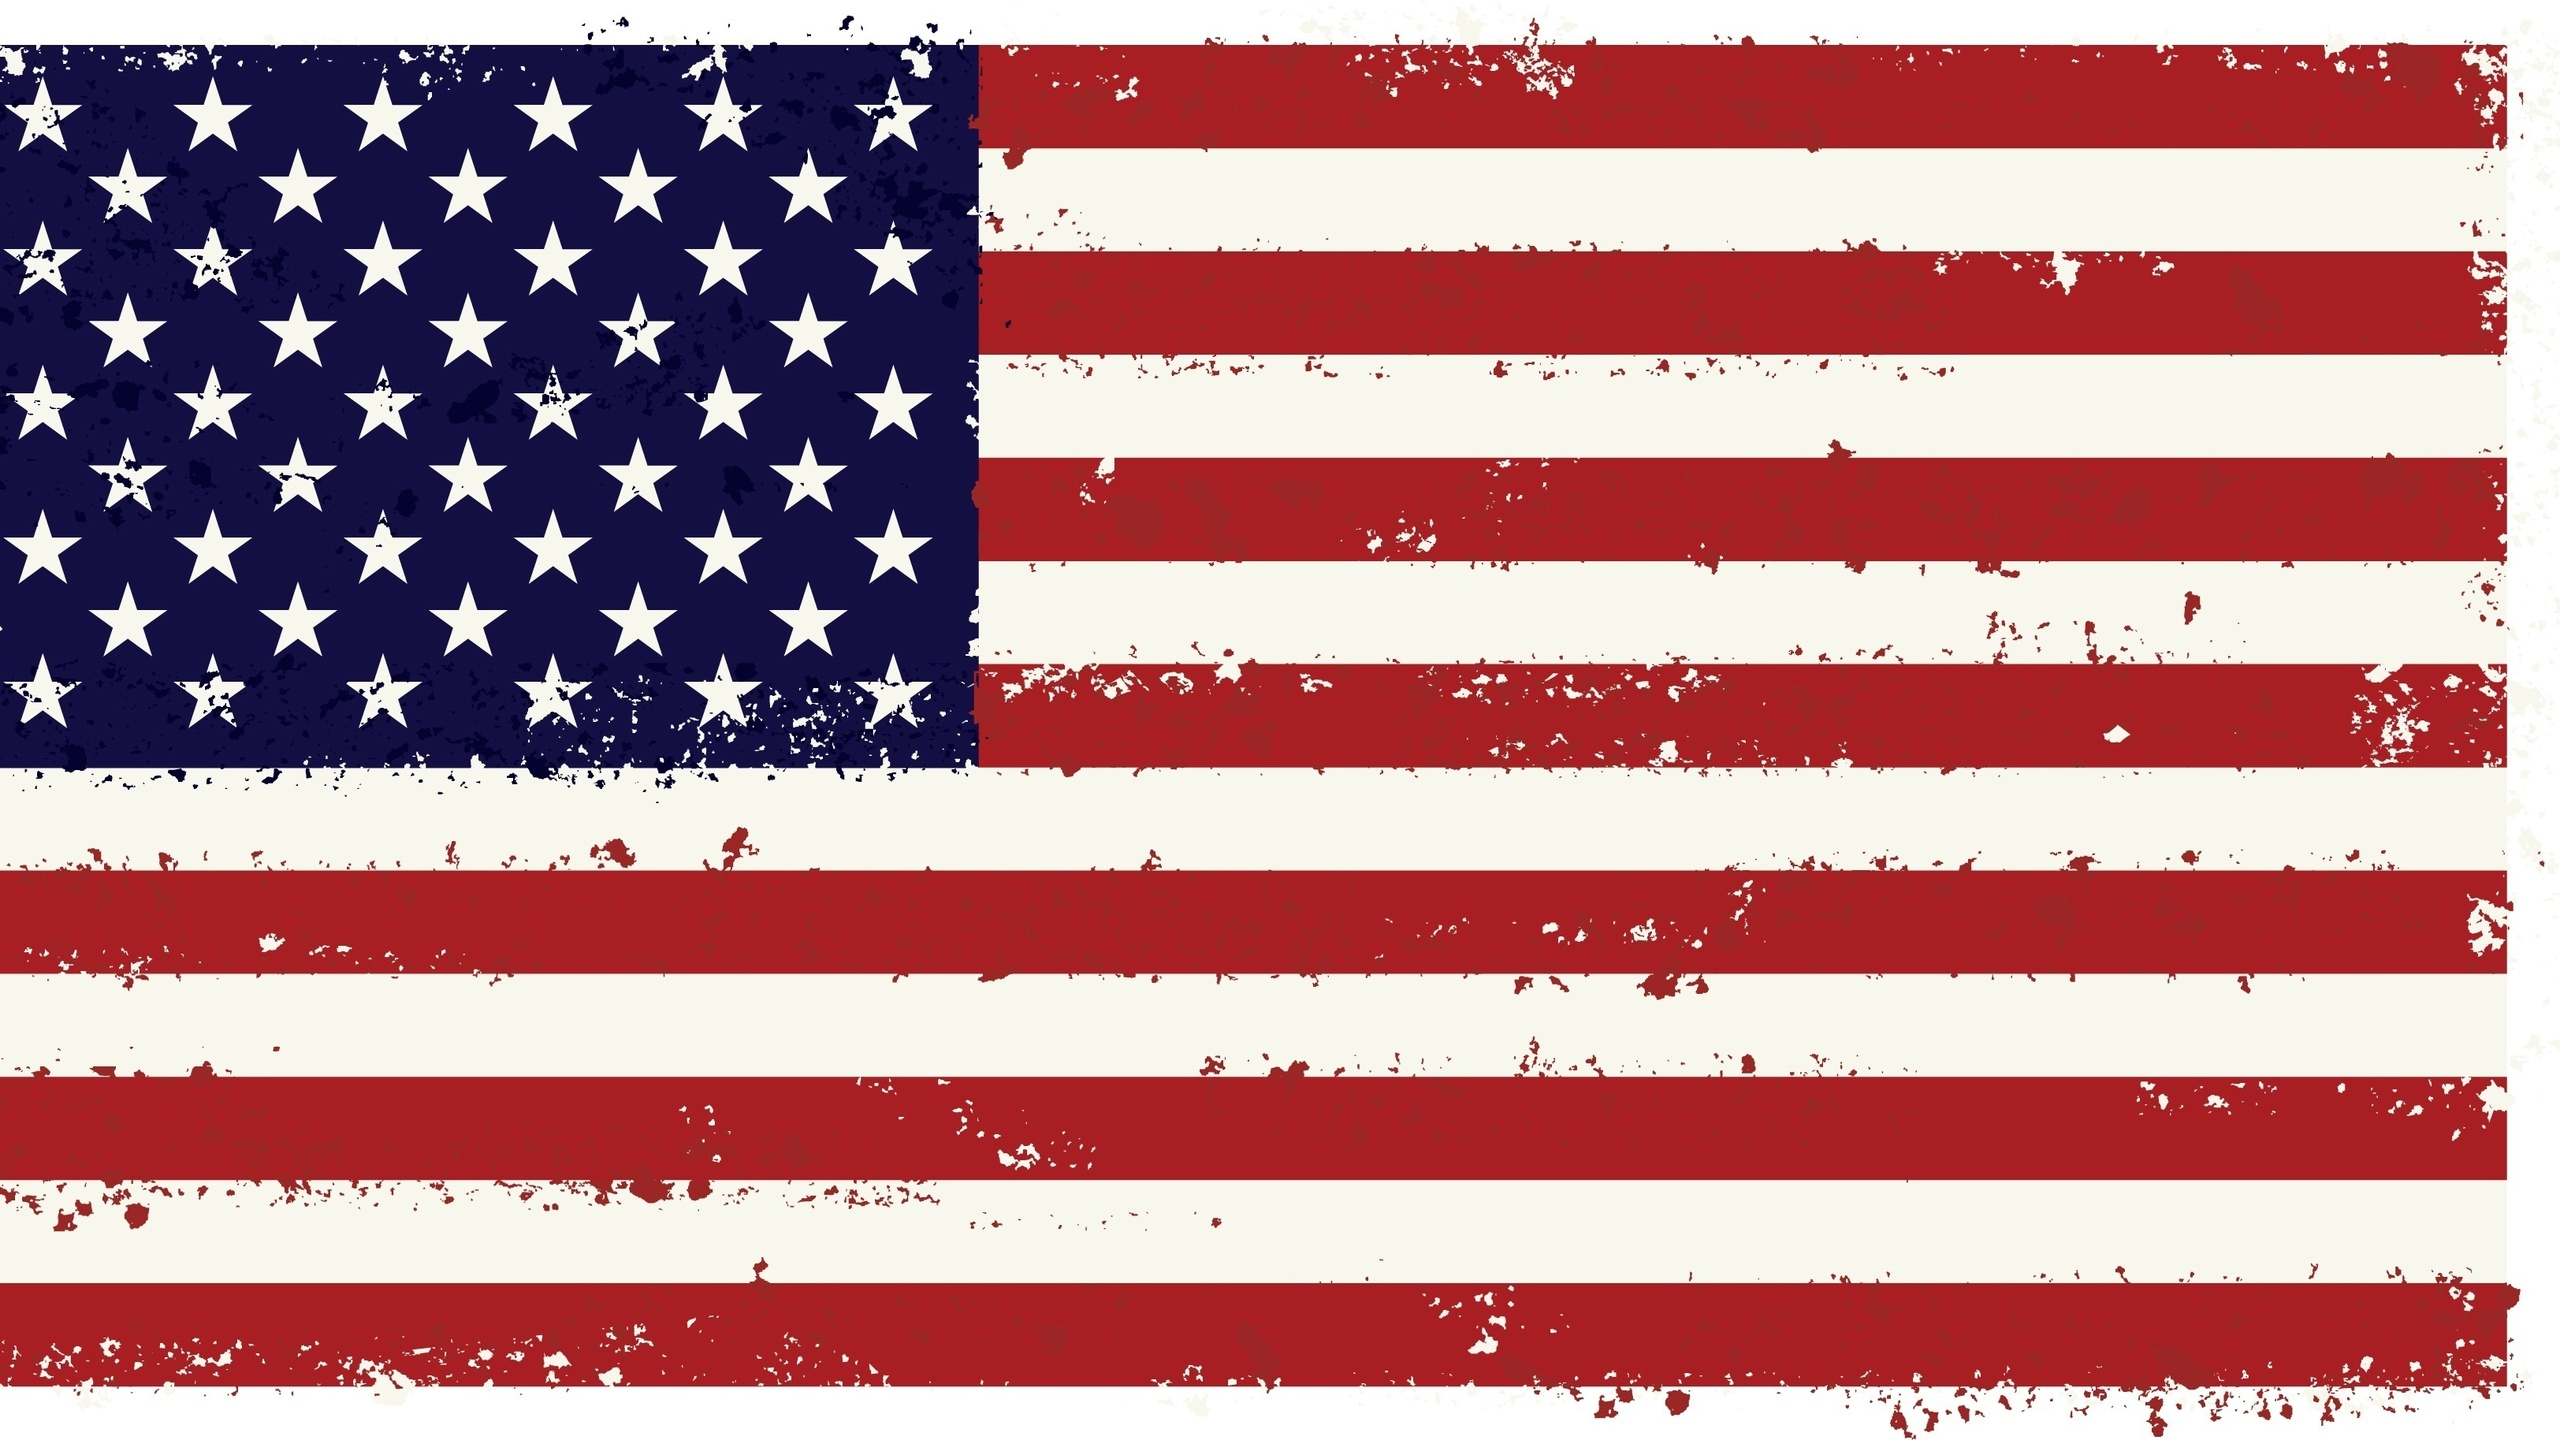 2560x1440 USA Flag Wallpaper image Le Fancy Wallpapers Mod DB